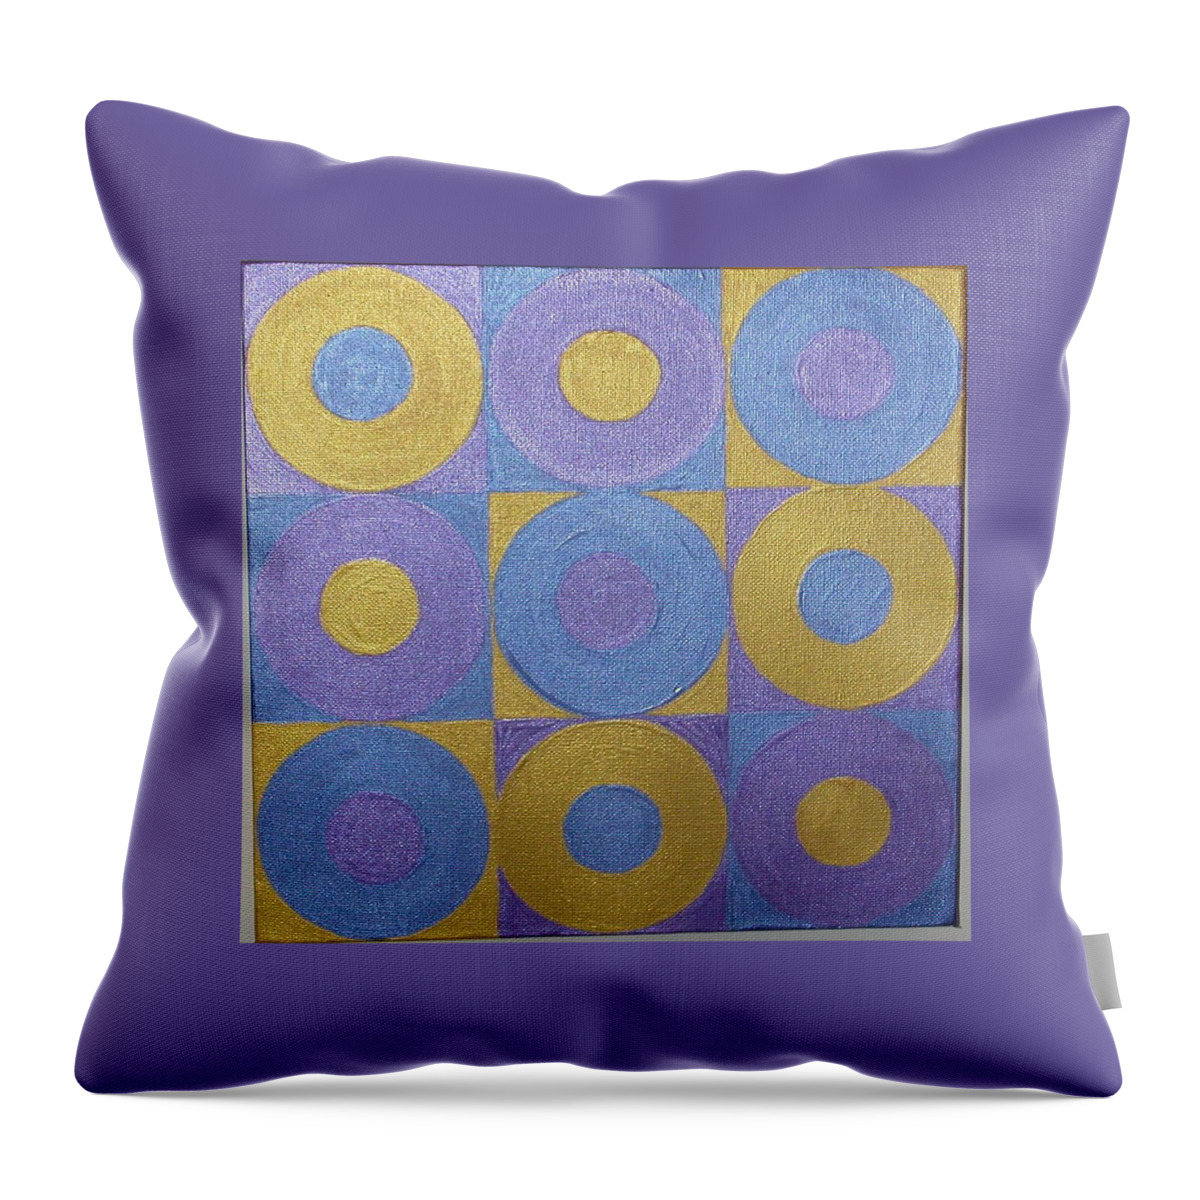 Bkue Throw Pillow featuring the painting Got the Brass Blues by Gay Dallek